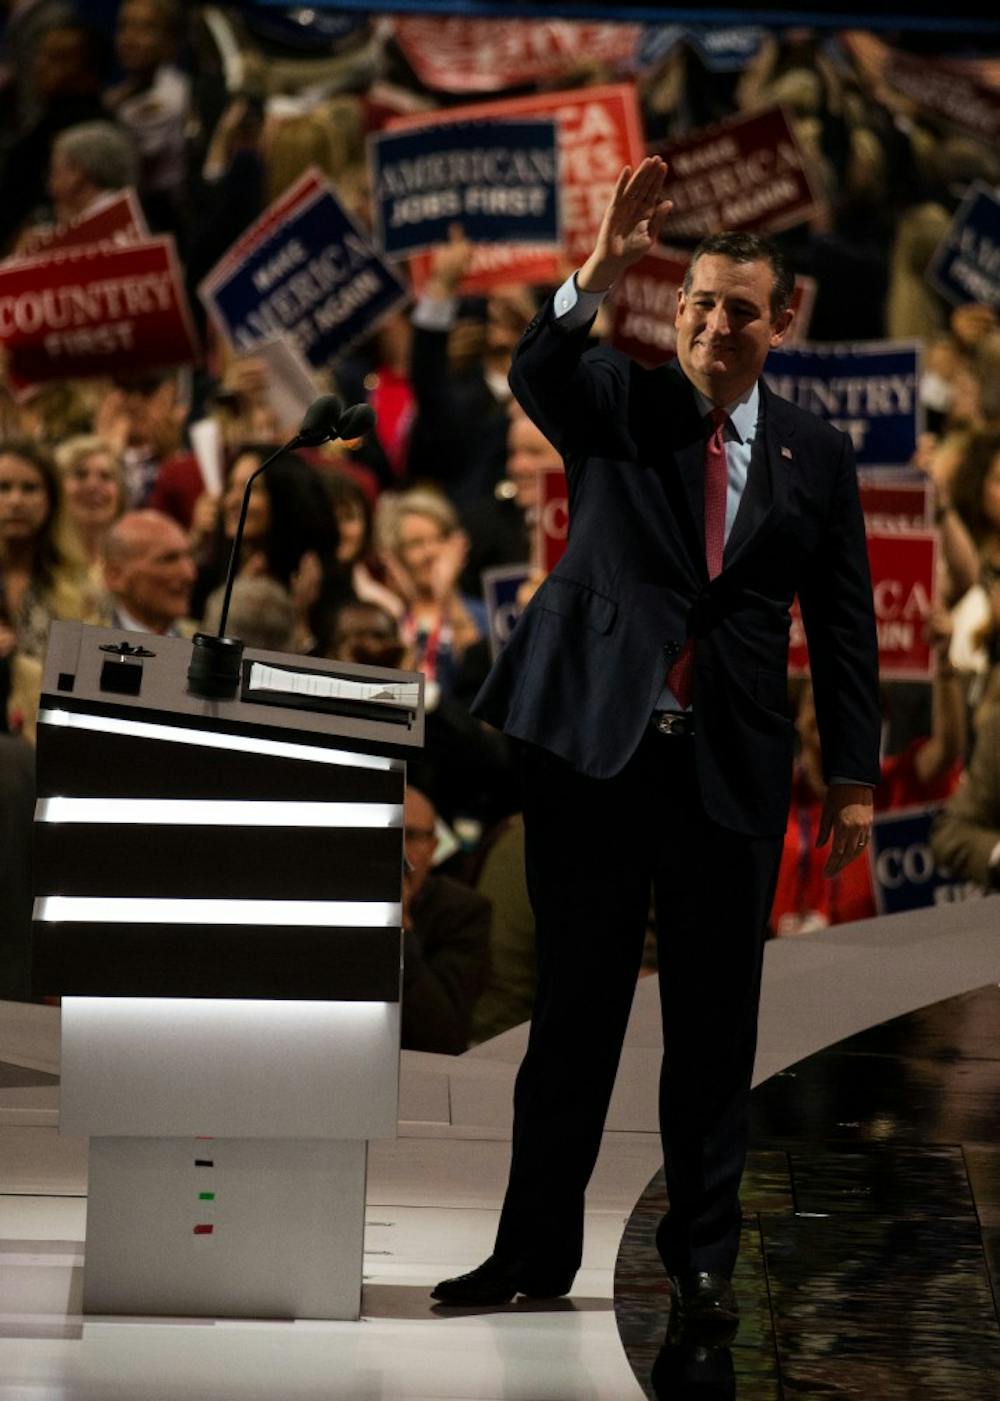 Senator Ted Cruz waves to the audience at the Republican National Convention on Wednesday night in Cleveland, Ohio. Cruz was one of many speakers for the night.